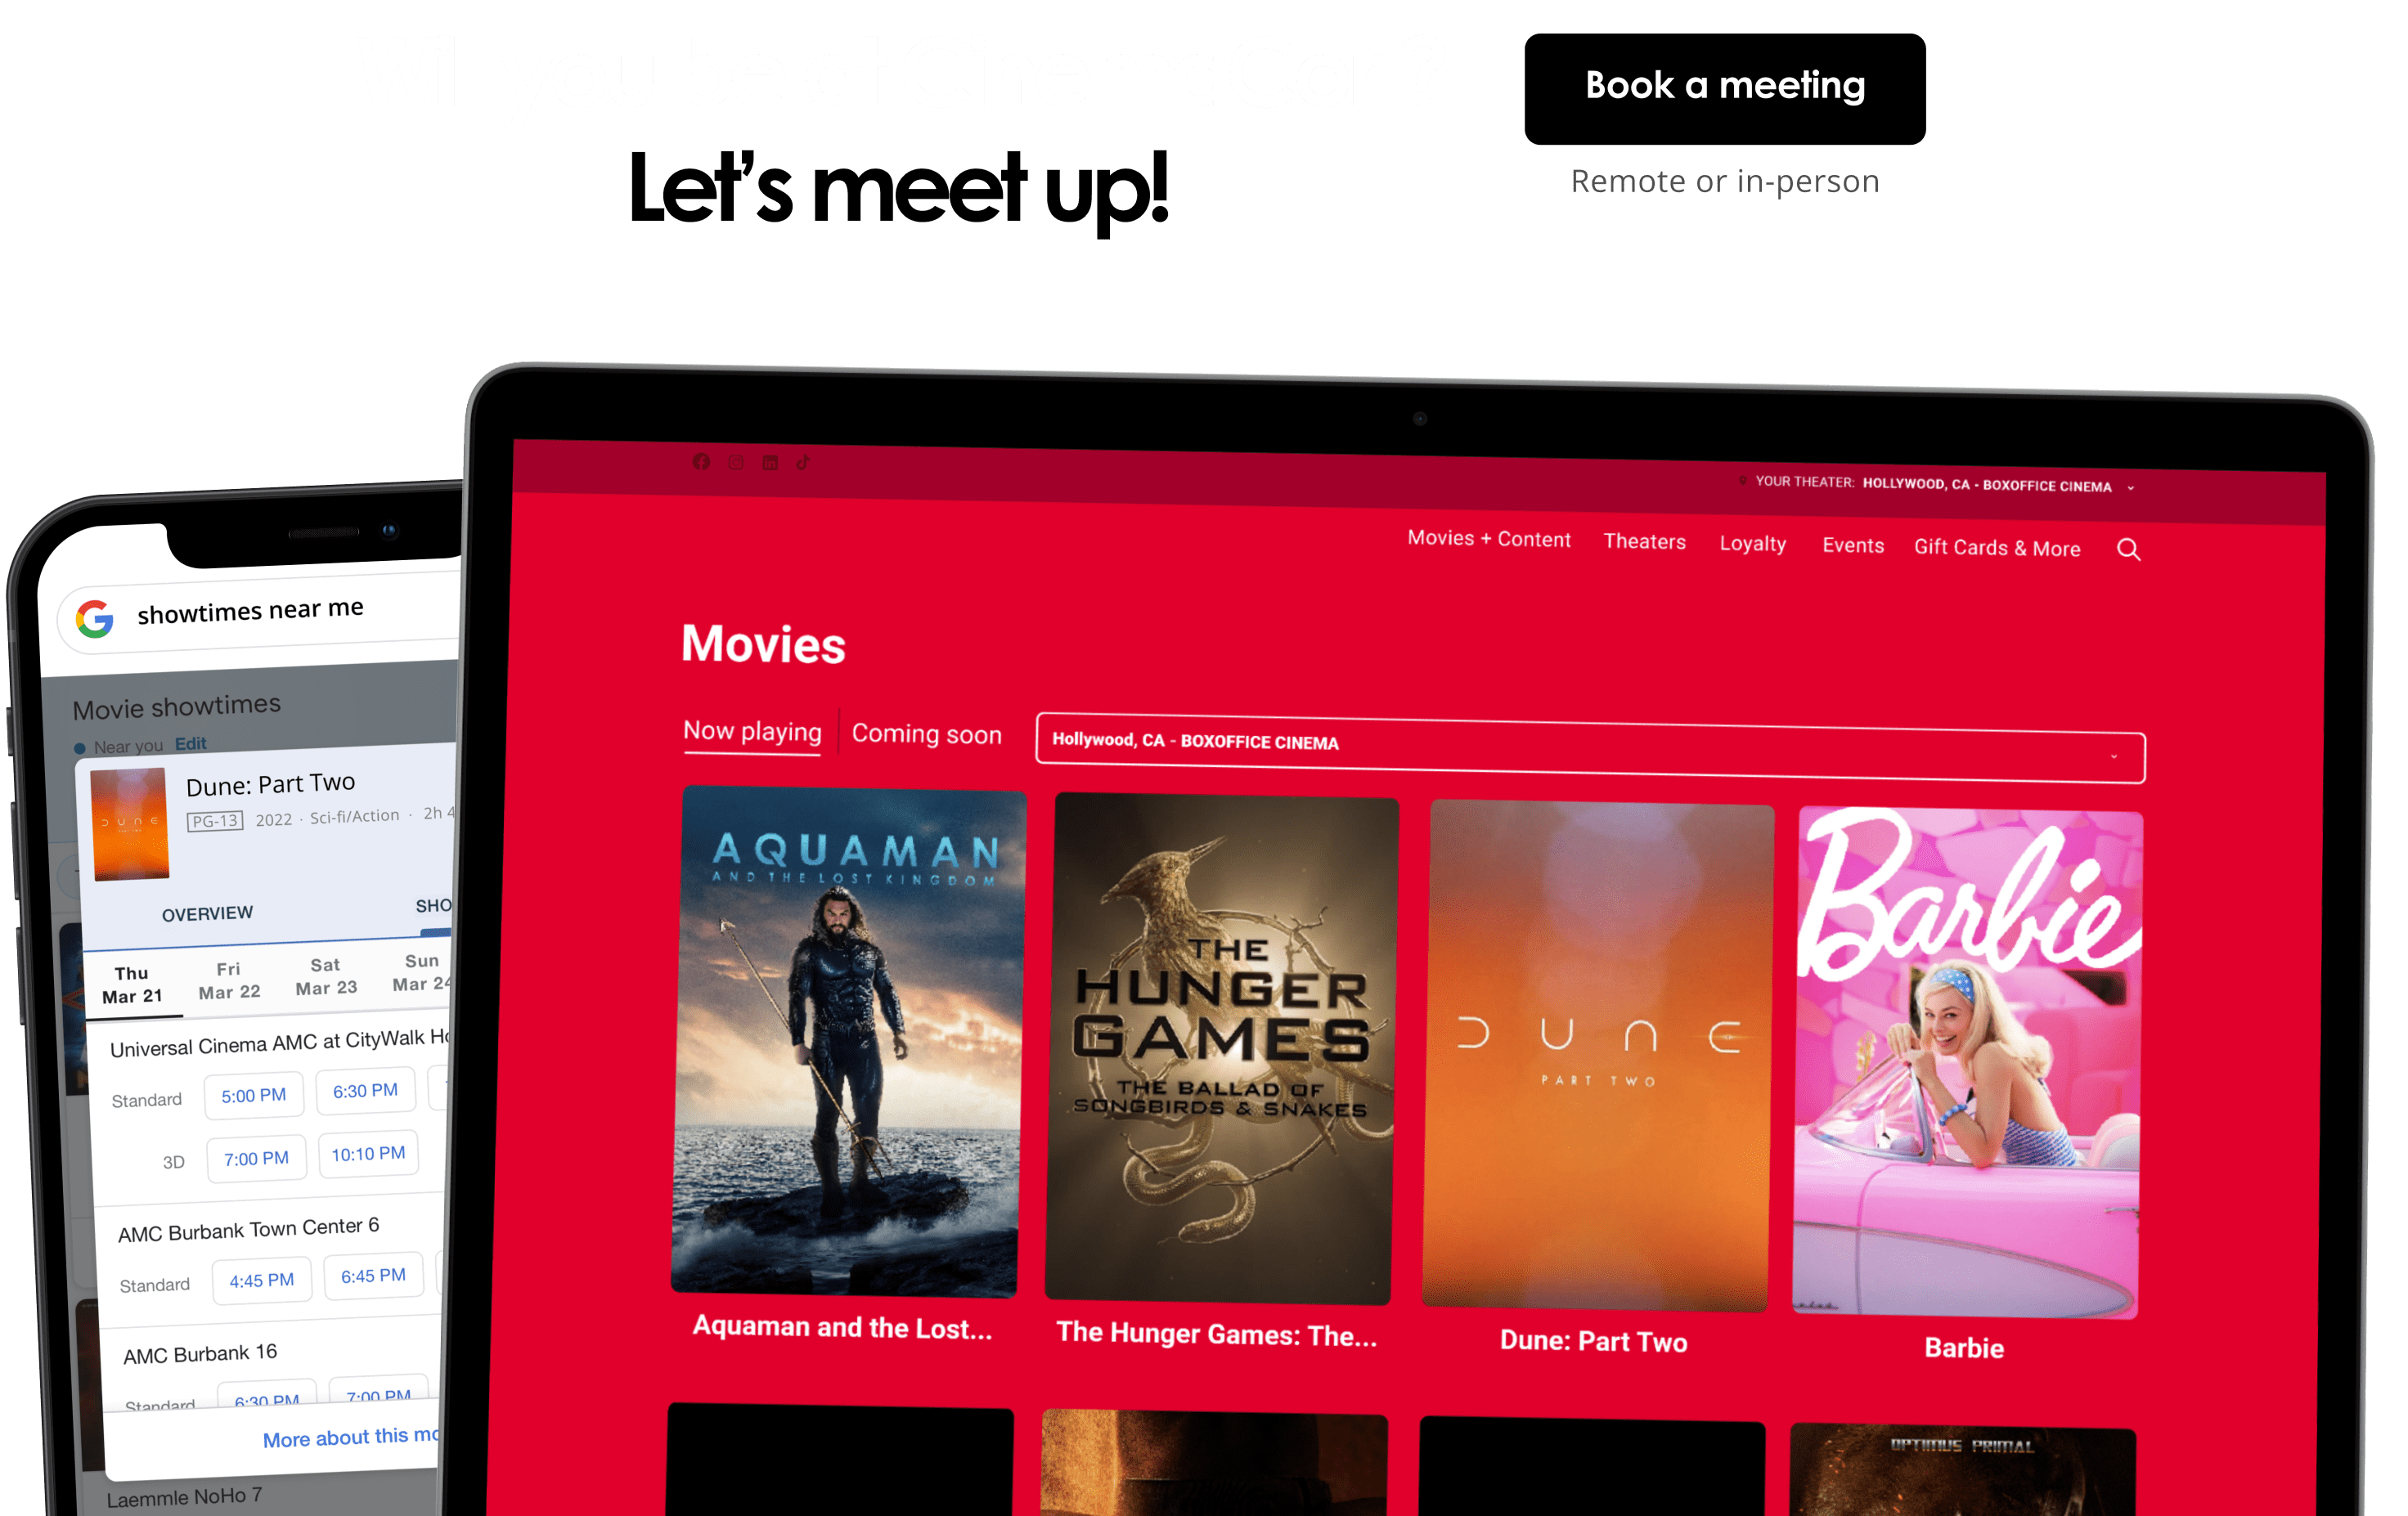 Find out about our Digital Marketing for Movie Theaters